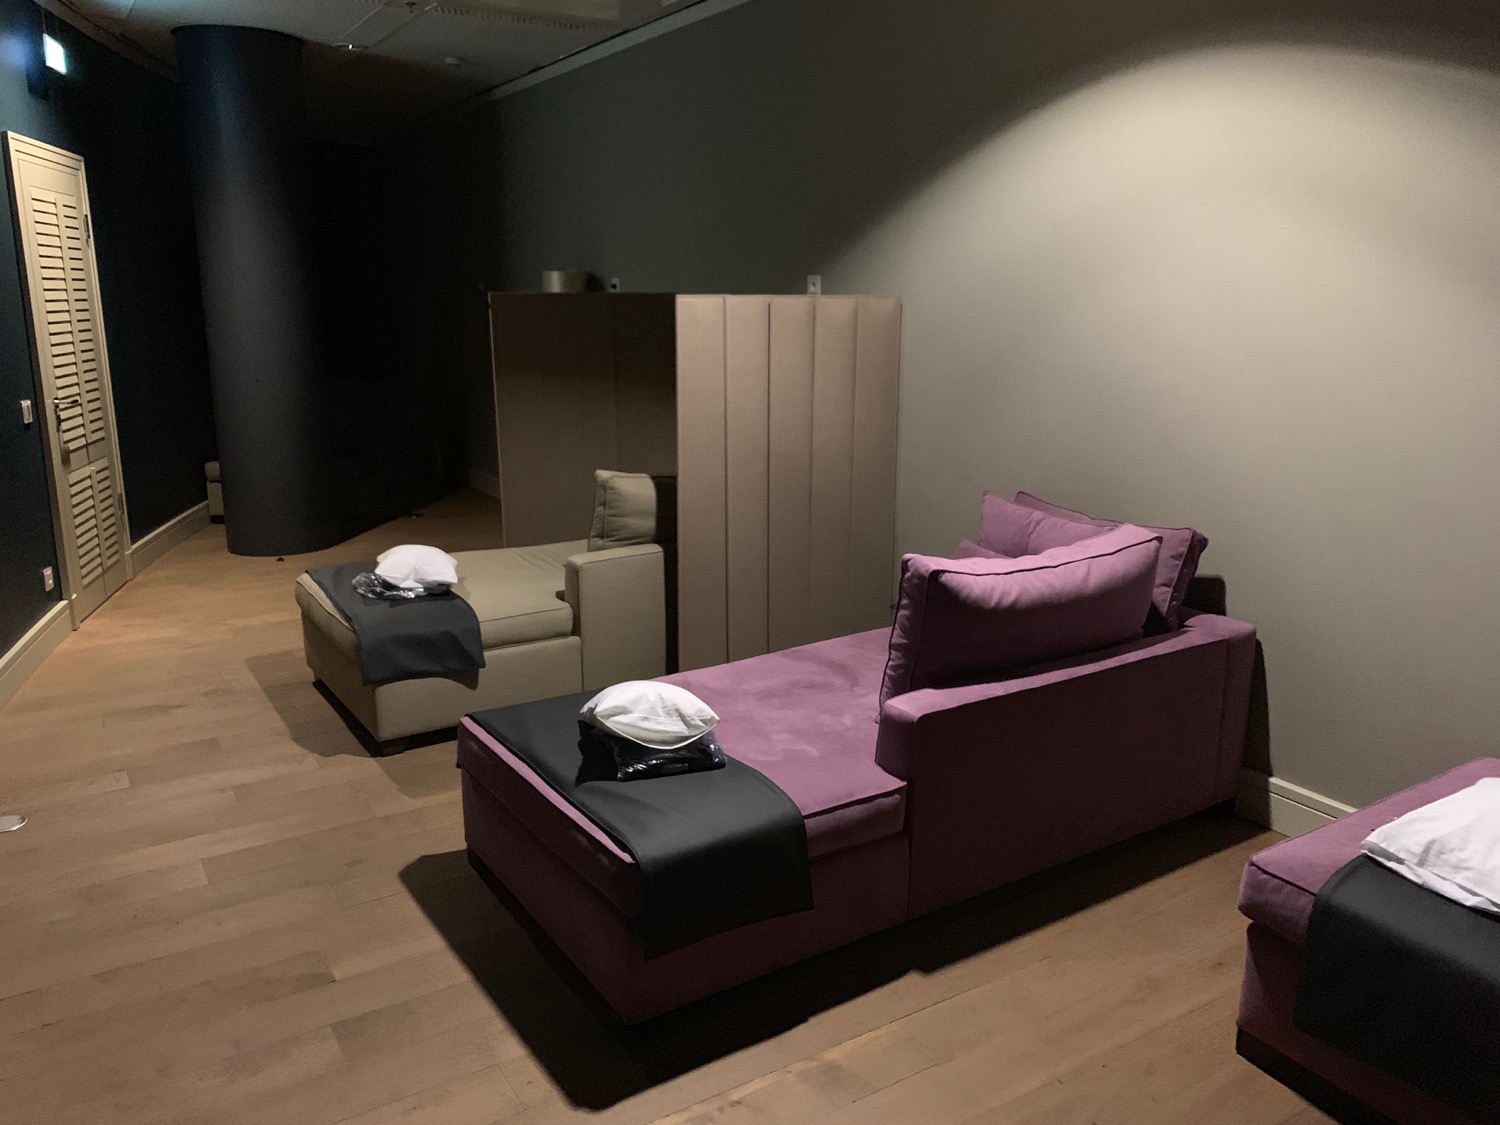 a room with purple couches and a wood floor